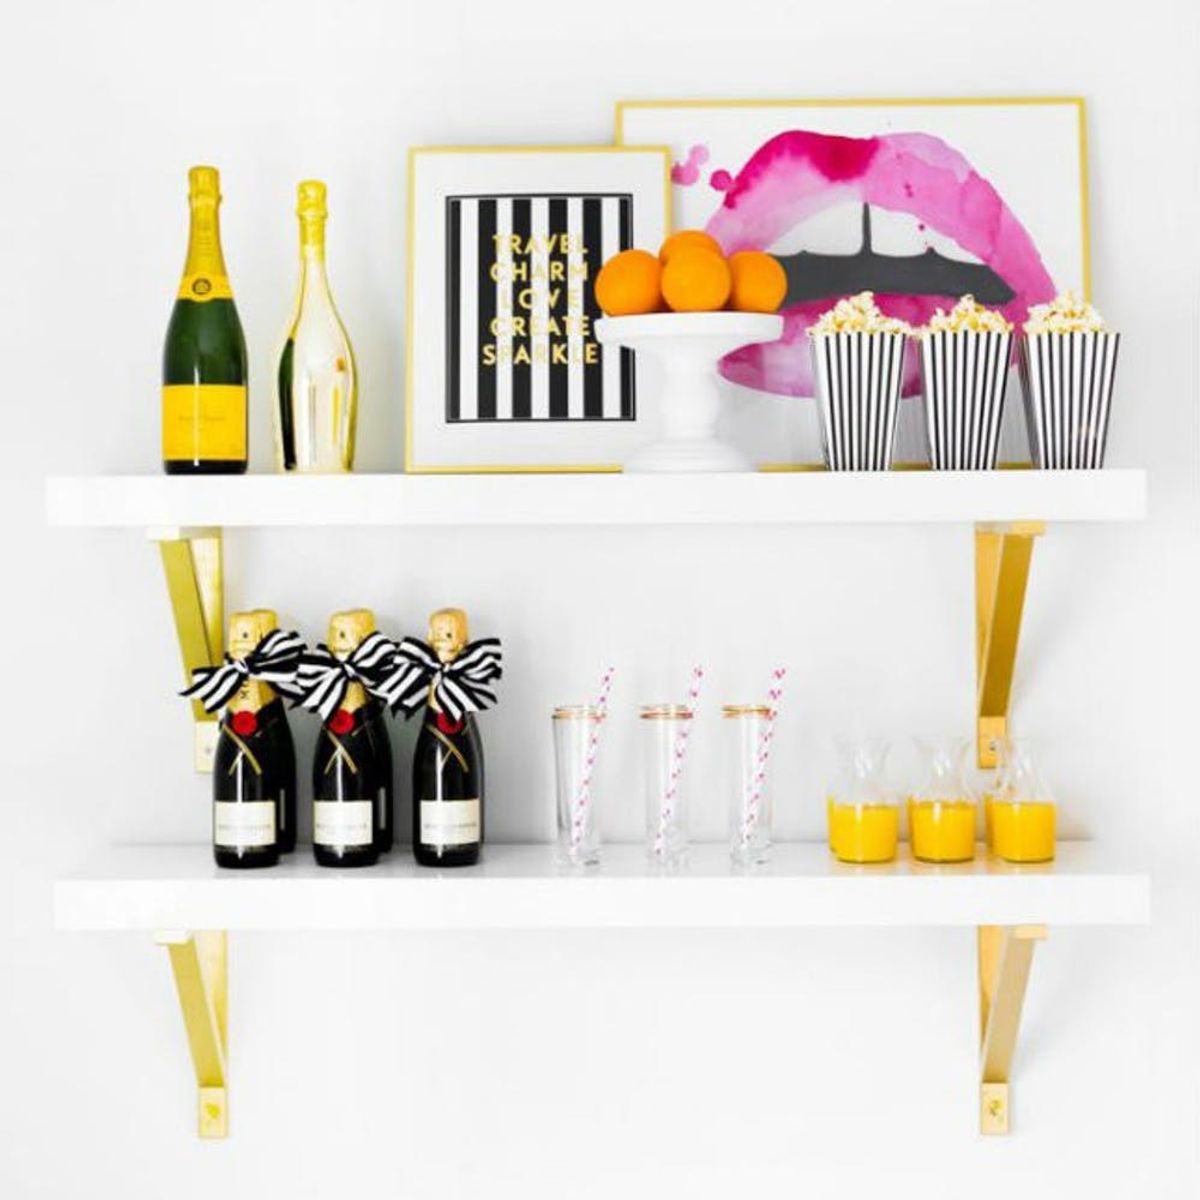 14 Small Space Tips for the Cocktail Maven Who Wants a Home Bar